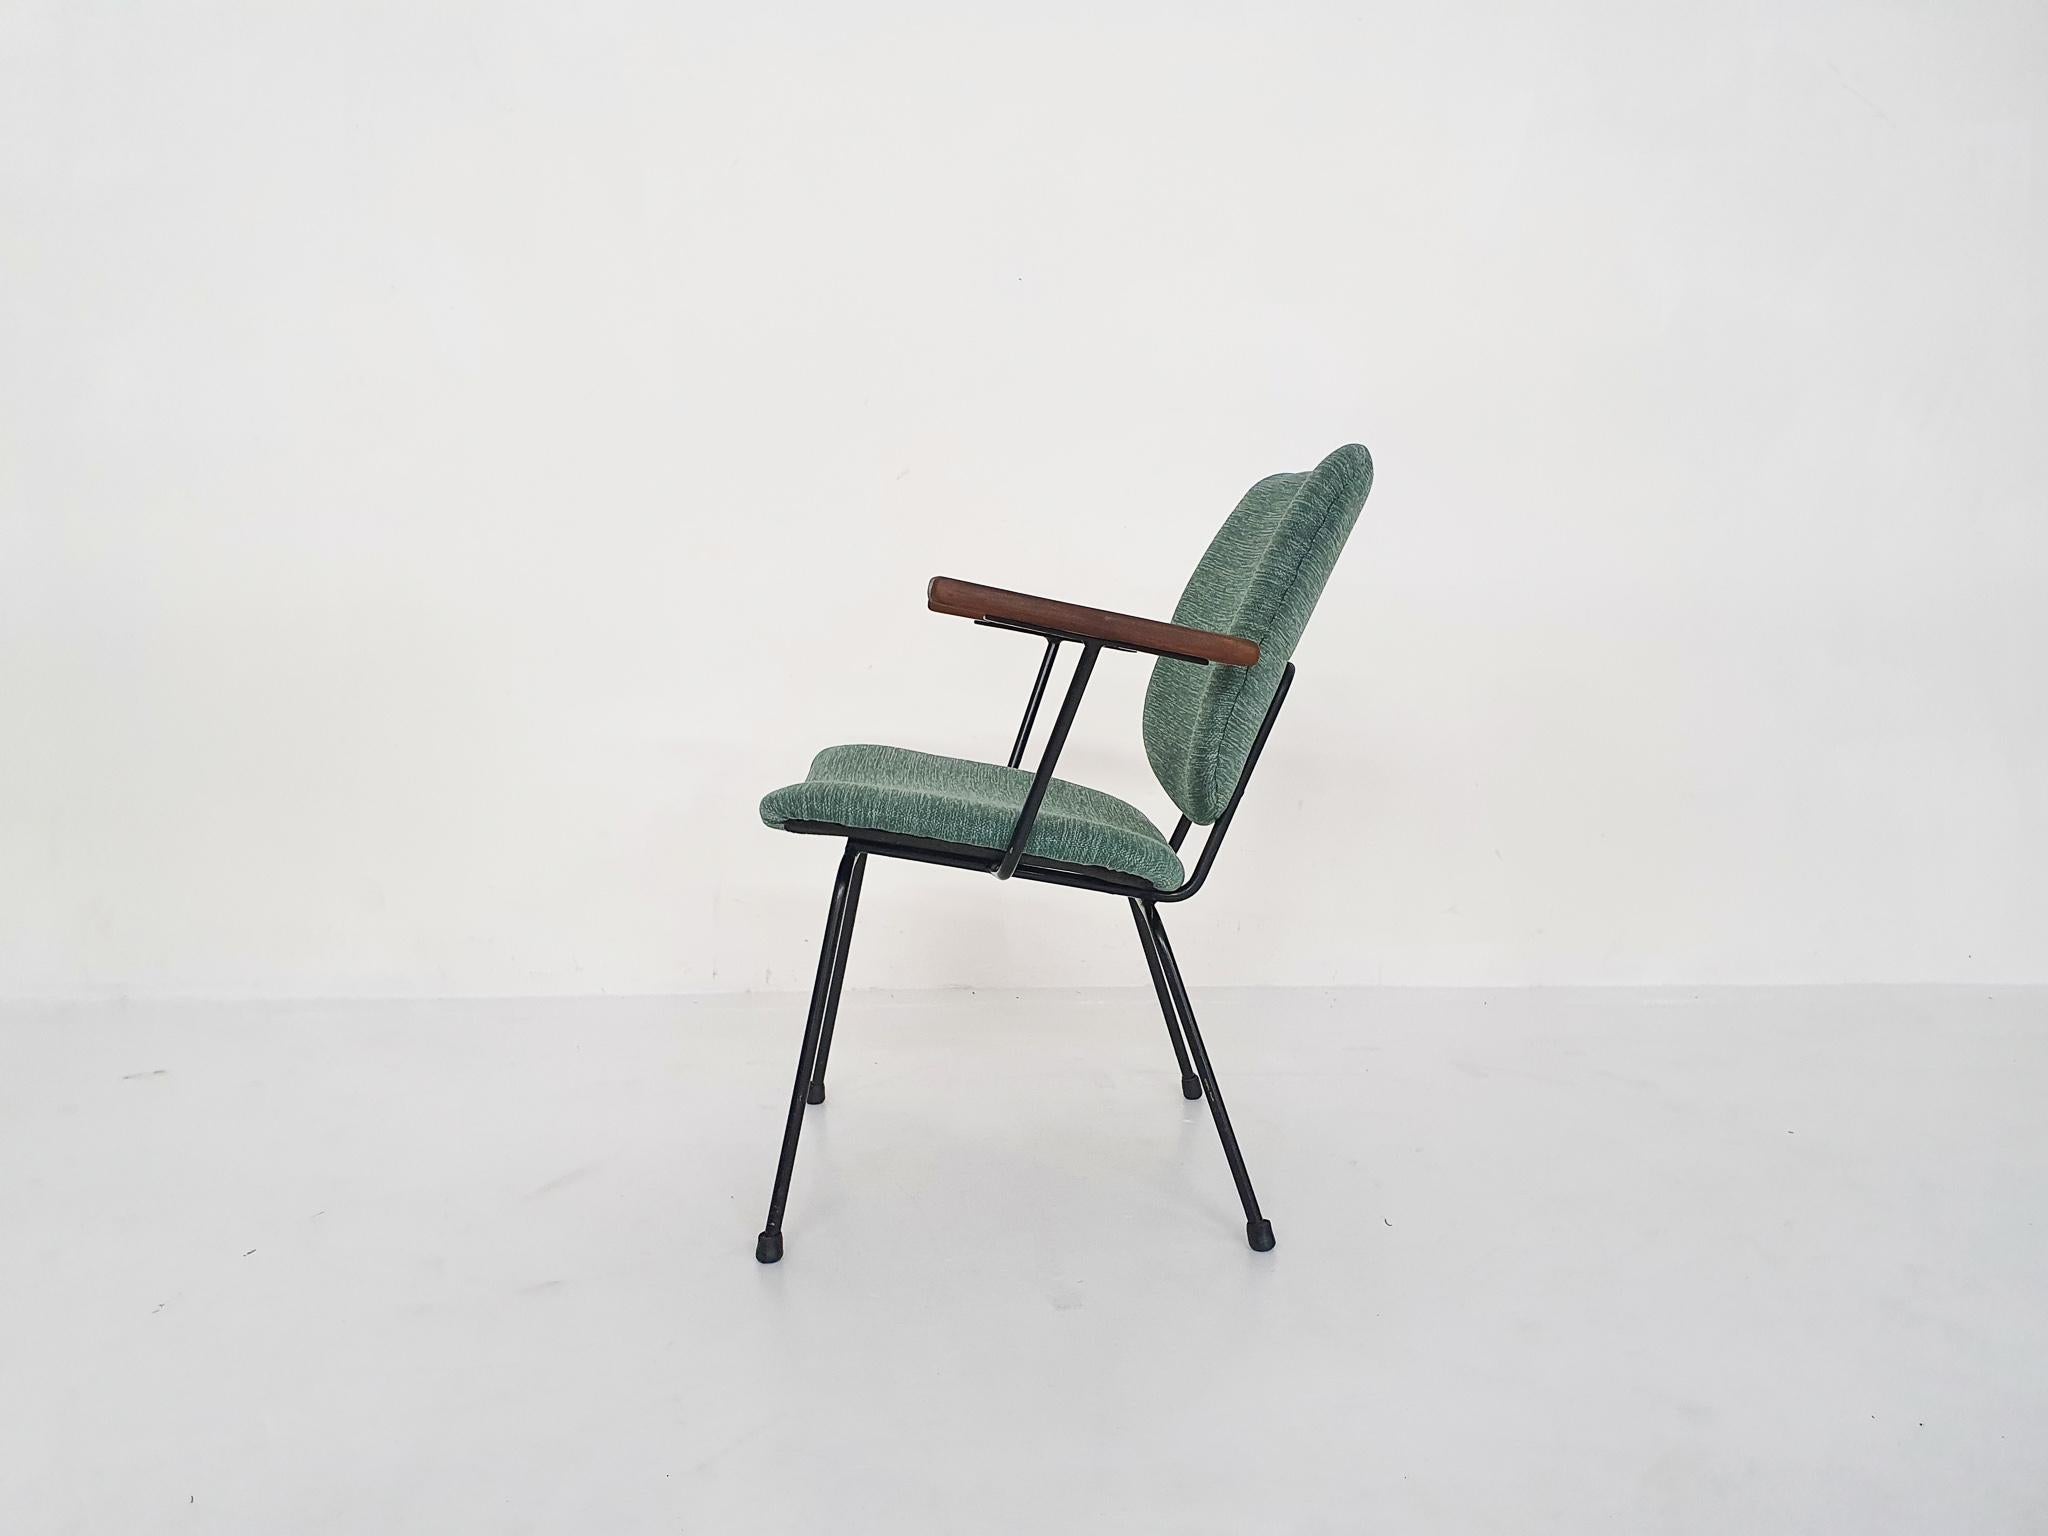 Minimalistic lounge chair, designed by W.H. Gispen for Kembo in The Netherlands in 1954
Black metal frame with teak arm rests and new green upholstery.